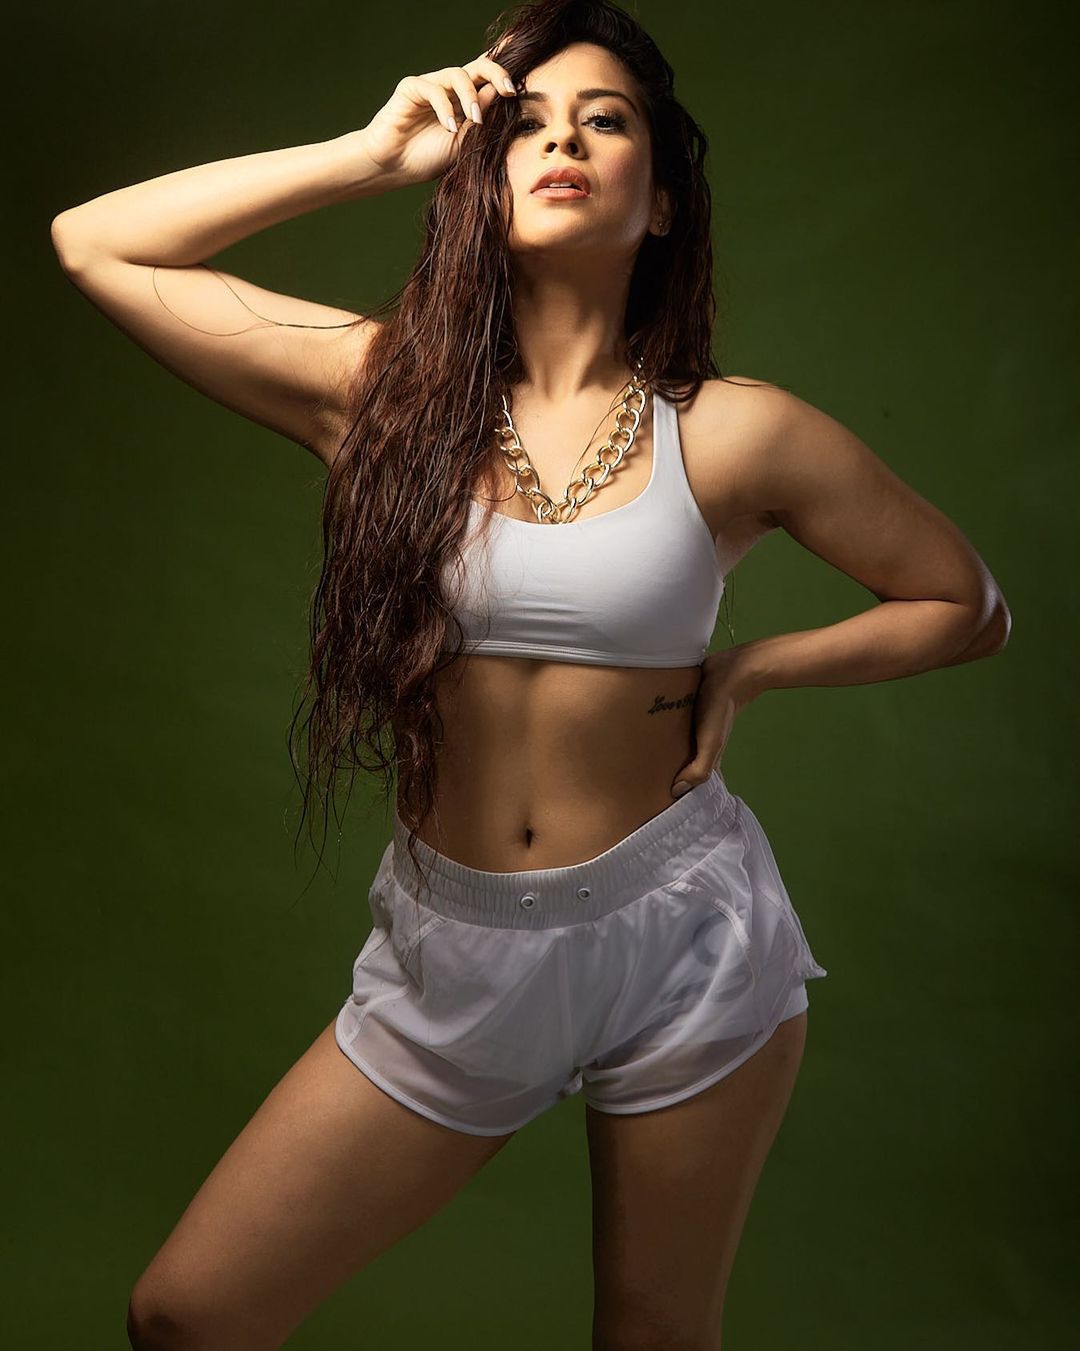 Sana Saeed looks super sexy in the white co-ord set.